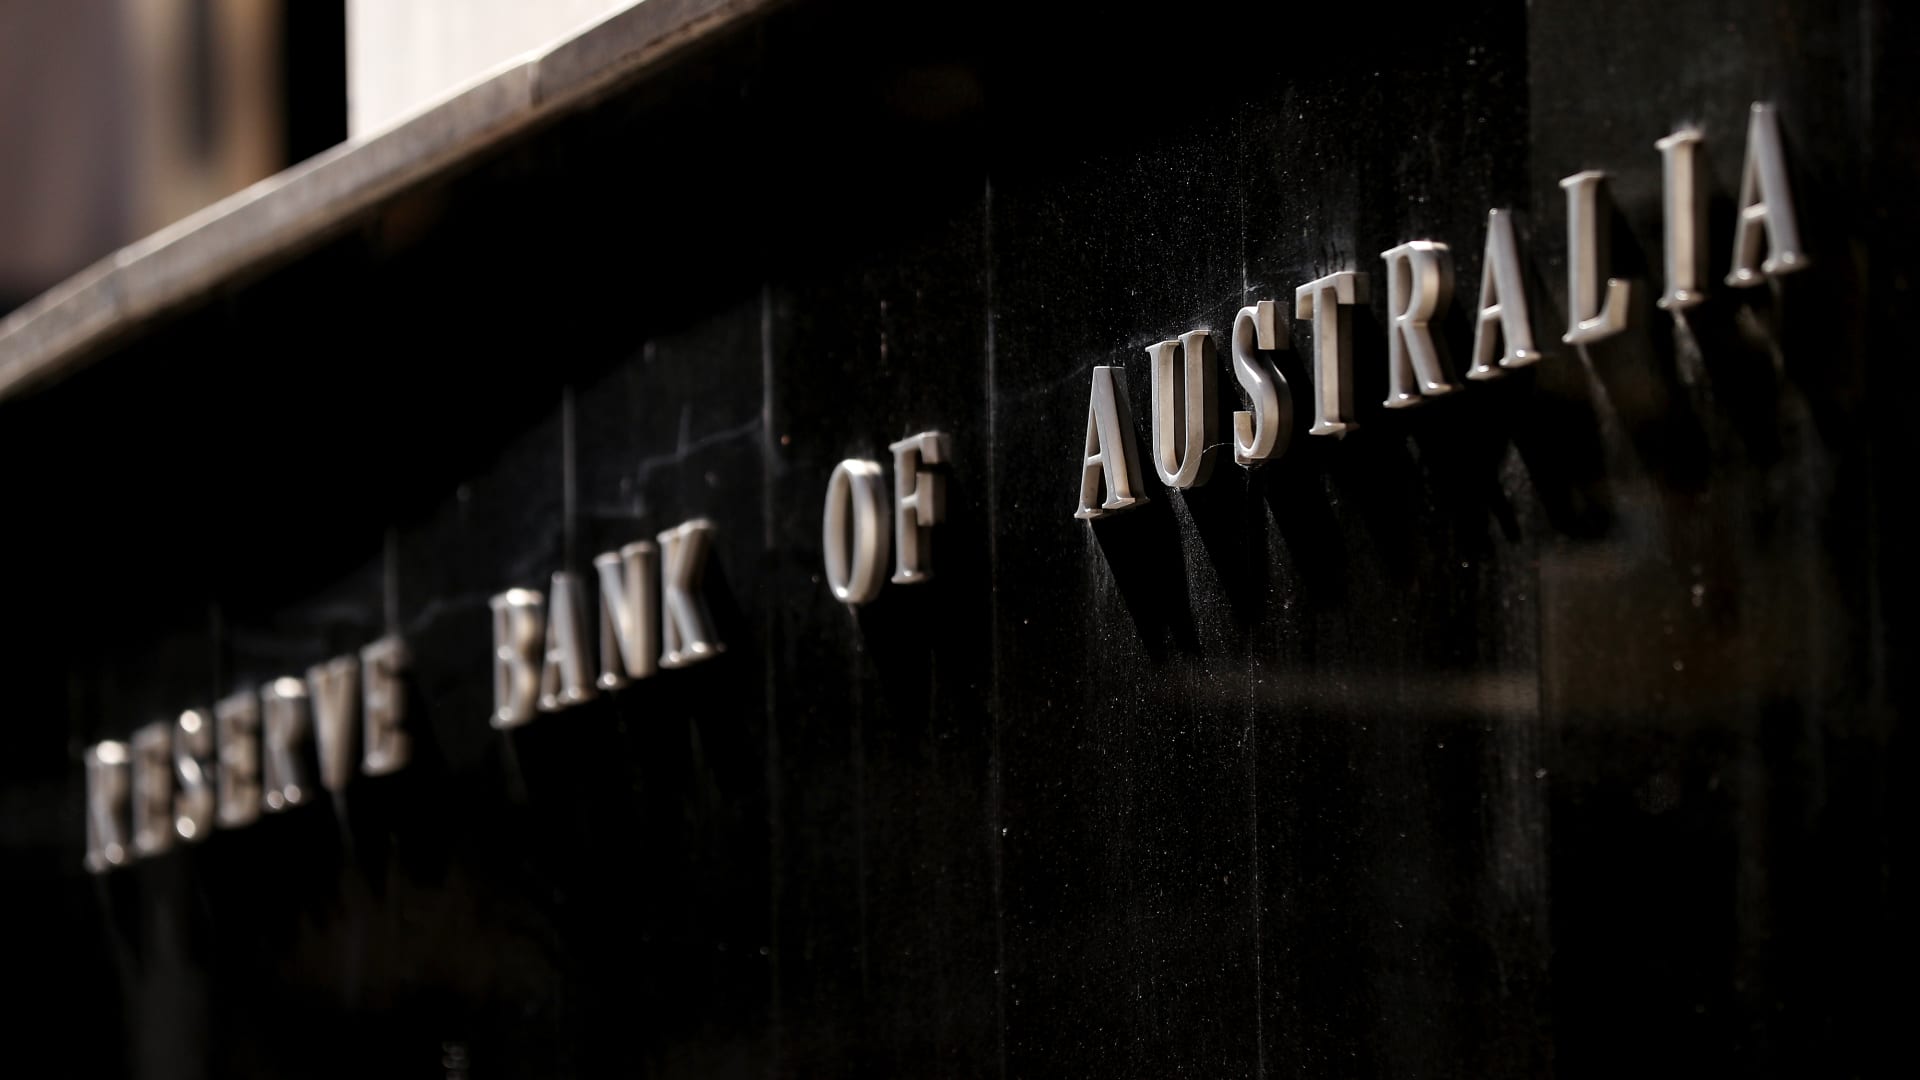 Australia central bank considered raising rates in October: RBA minutes